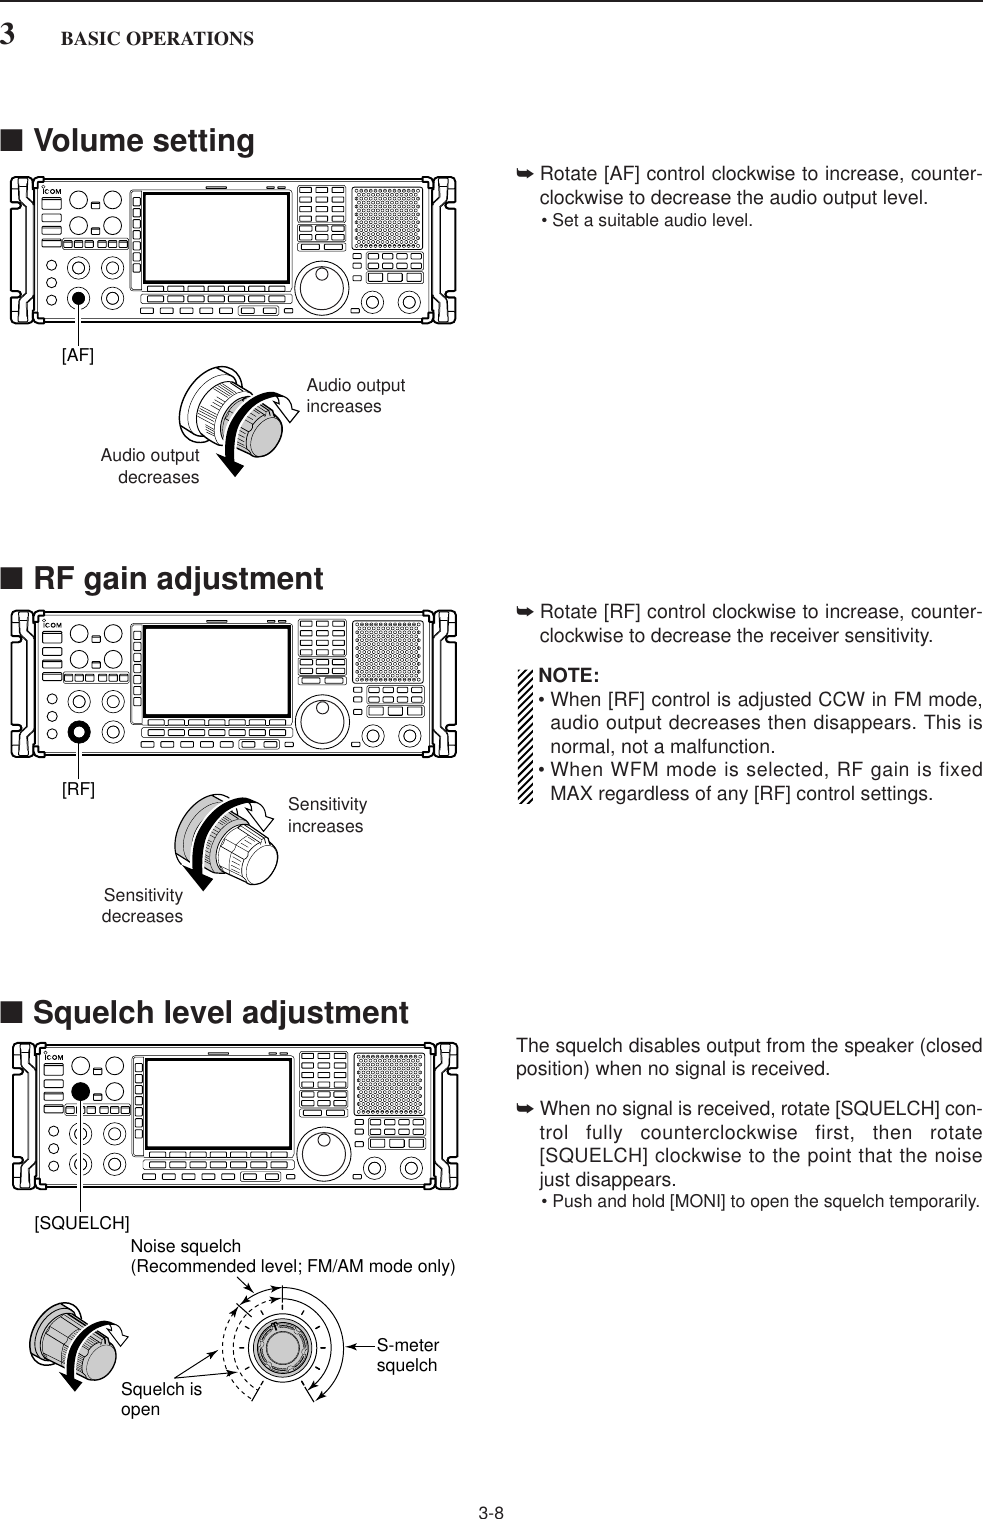 ■Volume setting➥Rotate [AF] control clockwise to increase, counter-clockwise to decrease the audio output level.• Set a suitable audio level.■RF gain adjustment➥Rotate [RF] control clockwise to increase, counter-clockwise to decrease the receiver sensitivity.NOTE:• When [RF] control is adjusted CCW in FM mode,audio output decreases then disappears. This isnormal, not a malfunction.• When WFM mode is selected, RF gain is fixedMAX regardless of any [RF] control settings.■Squelch level adjustmentThe squelch disables output from the speaker (closedposition) when no signal is received.➥When no signal is received, rotate [SQUELCH] con-trol fully counterclockwise first, then rotate[SQUELCH] clockwise to the point that the noisejust disappears.• Push and hold [MONI] to open the squelch temporarily.[SQUELCH]S-metersquelchNoise squelch (Recommended level; FM/AM mode only)Squelch is openSensitivityincreasesSensitivitydecreases[RF]Audio outputincreasesAudio outputdecreases[AF]3-83BASIC OPERATIONS